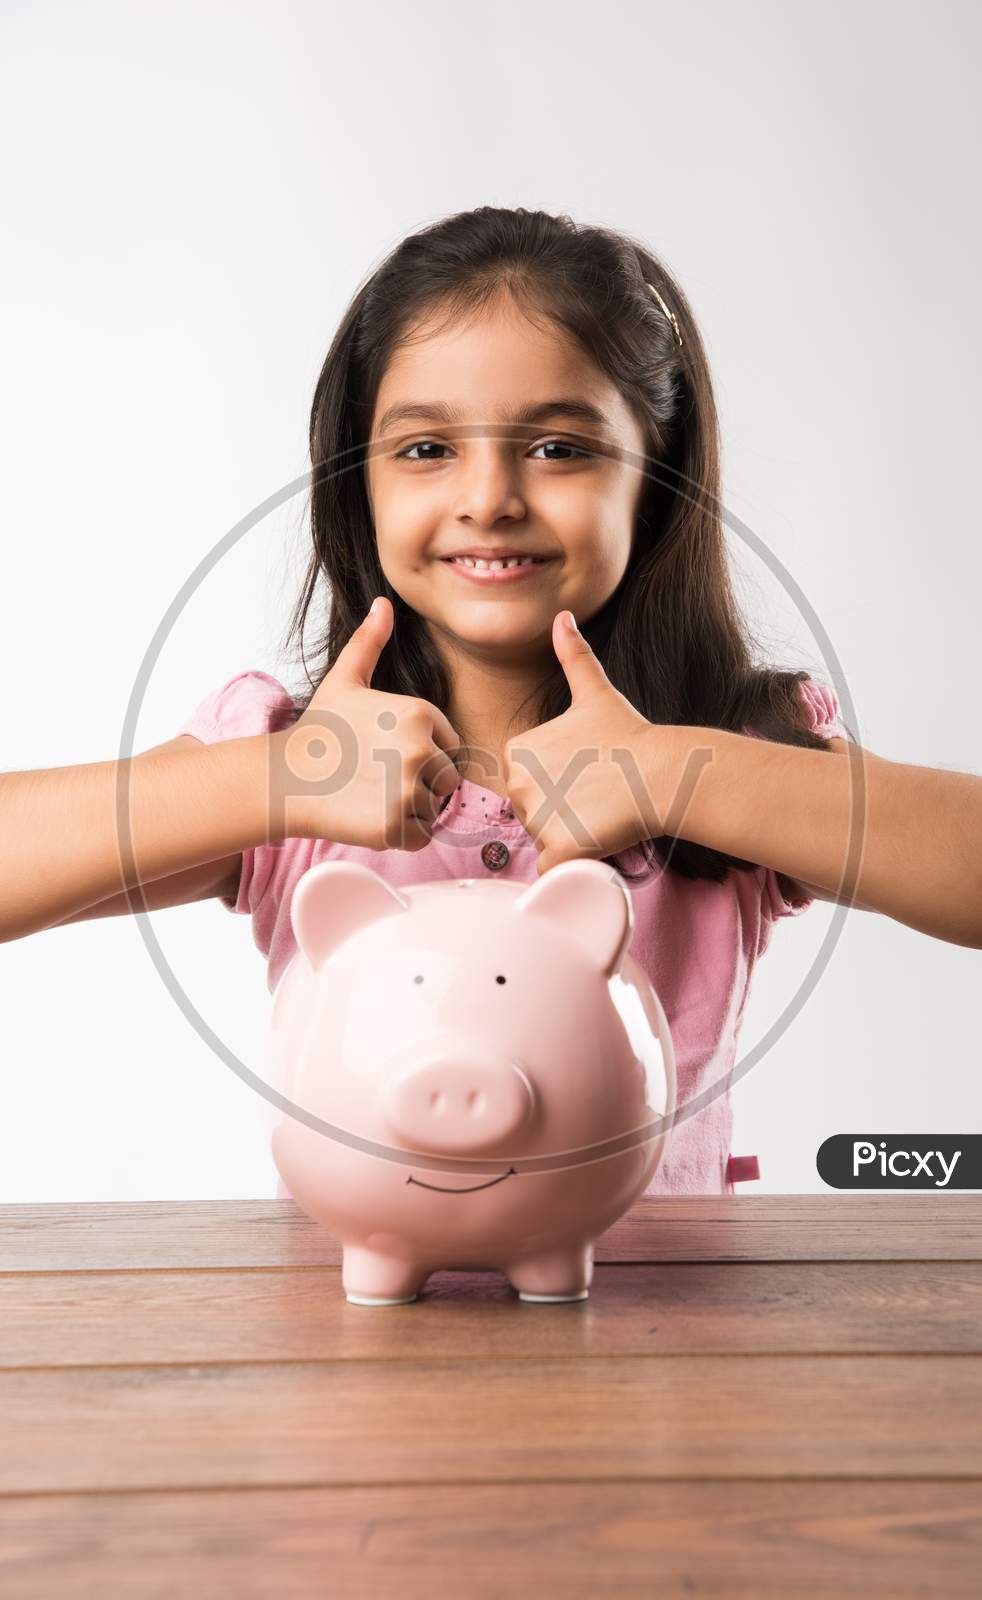 cute little Indian/asian girl holding pink piggy bank and books while standing isolated over green background